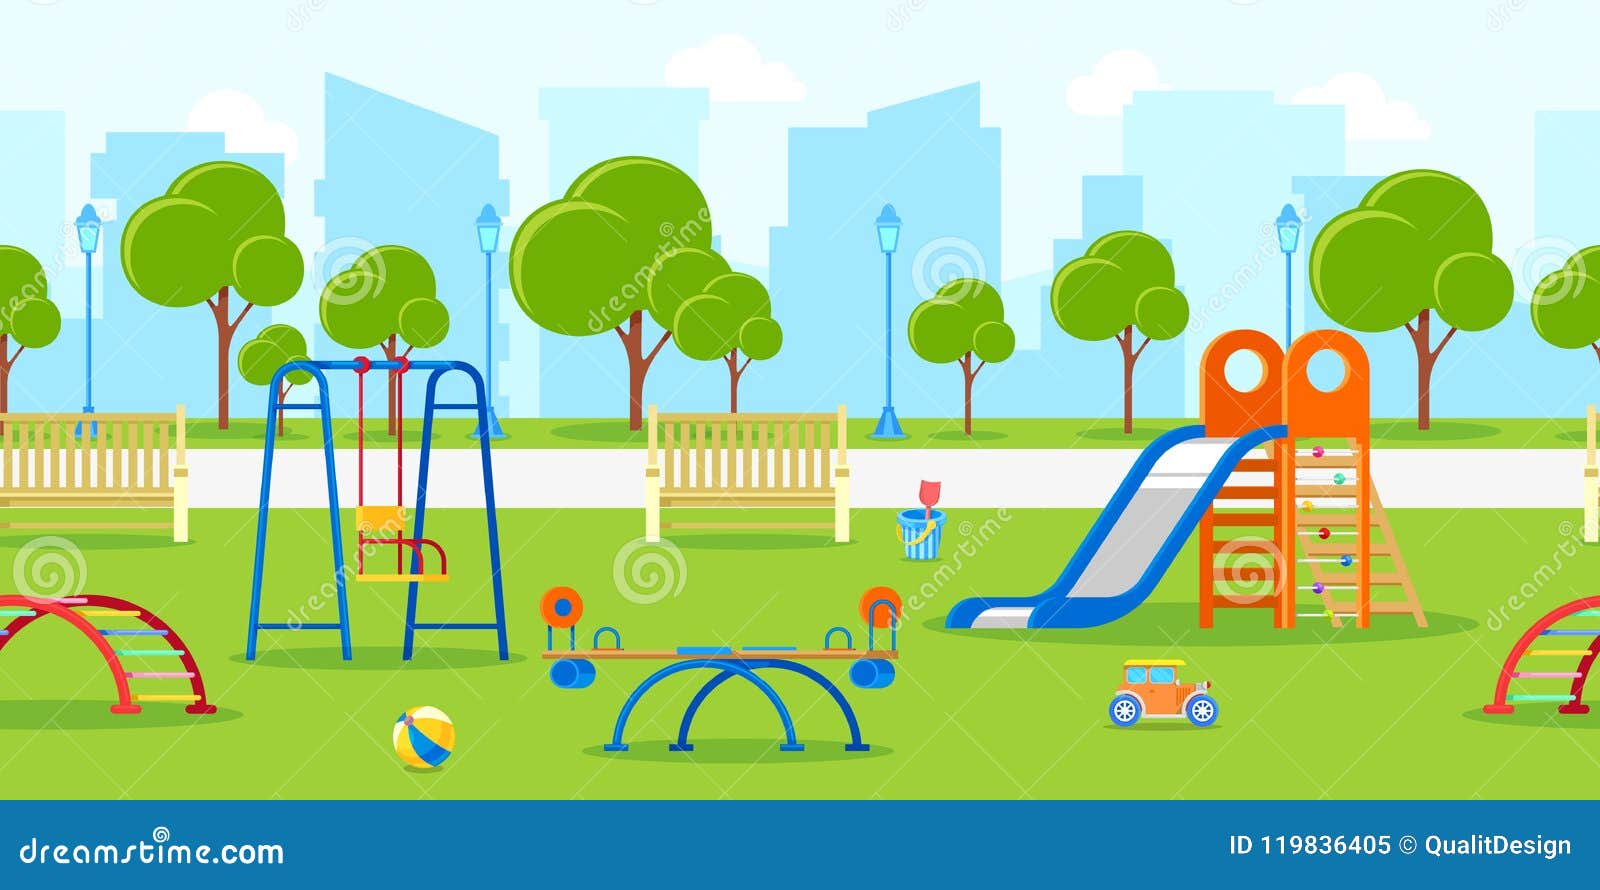 kindergarten or kids playground in city park.  horizontal seamless background. leisure and outdoor activities.